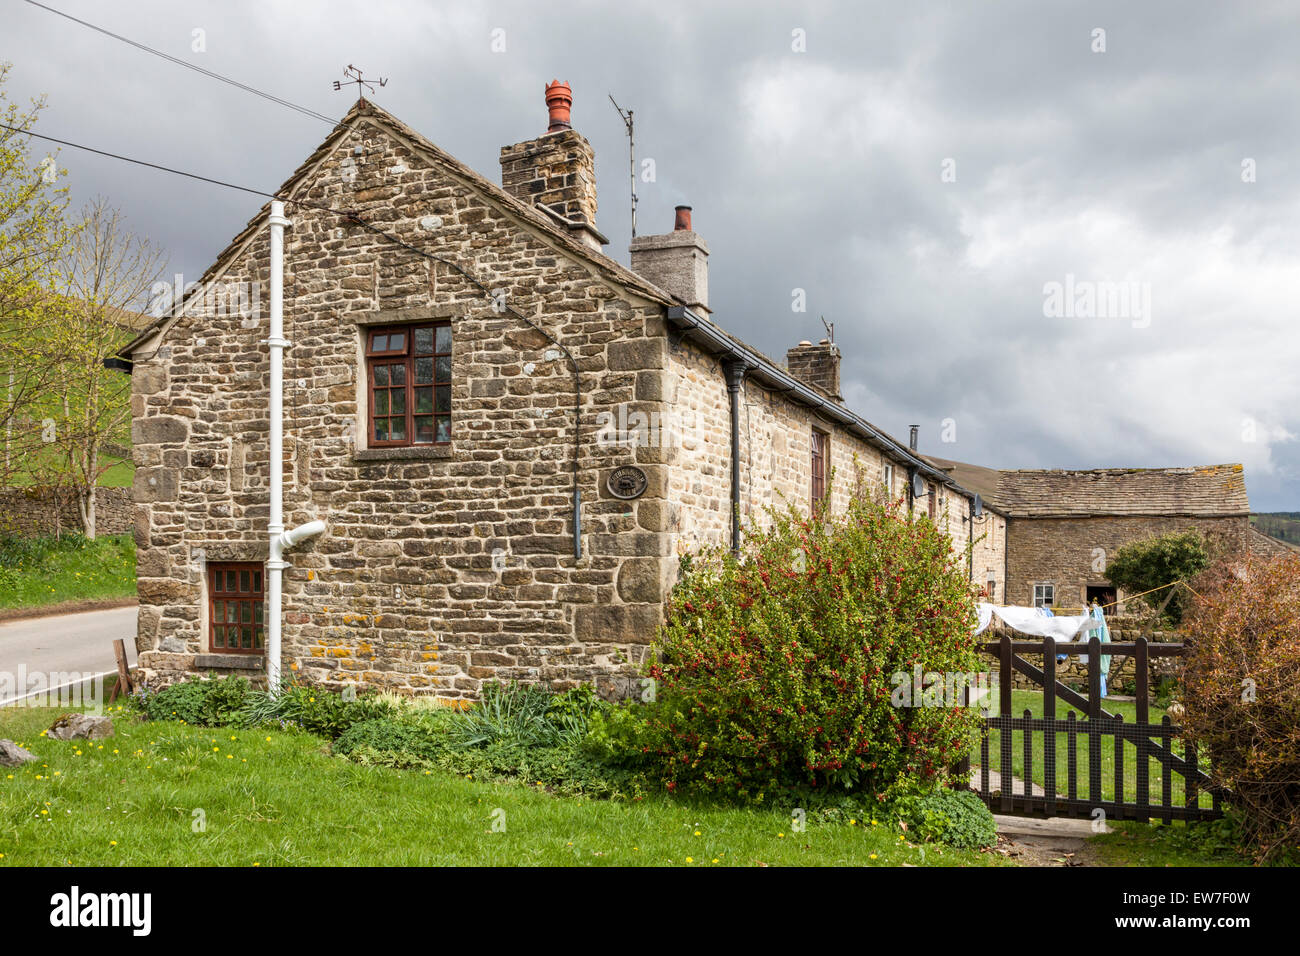 A typical stone built cottage at Nether Booth Farm, Nether Booth, Derbyshire, Peak District, England, UK Stock Photo